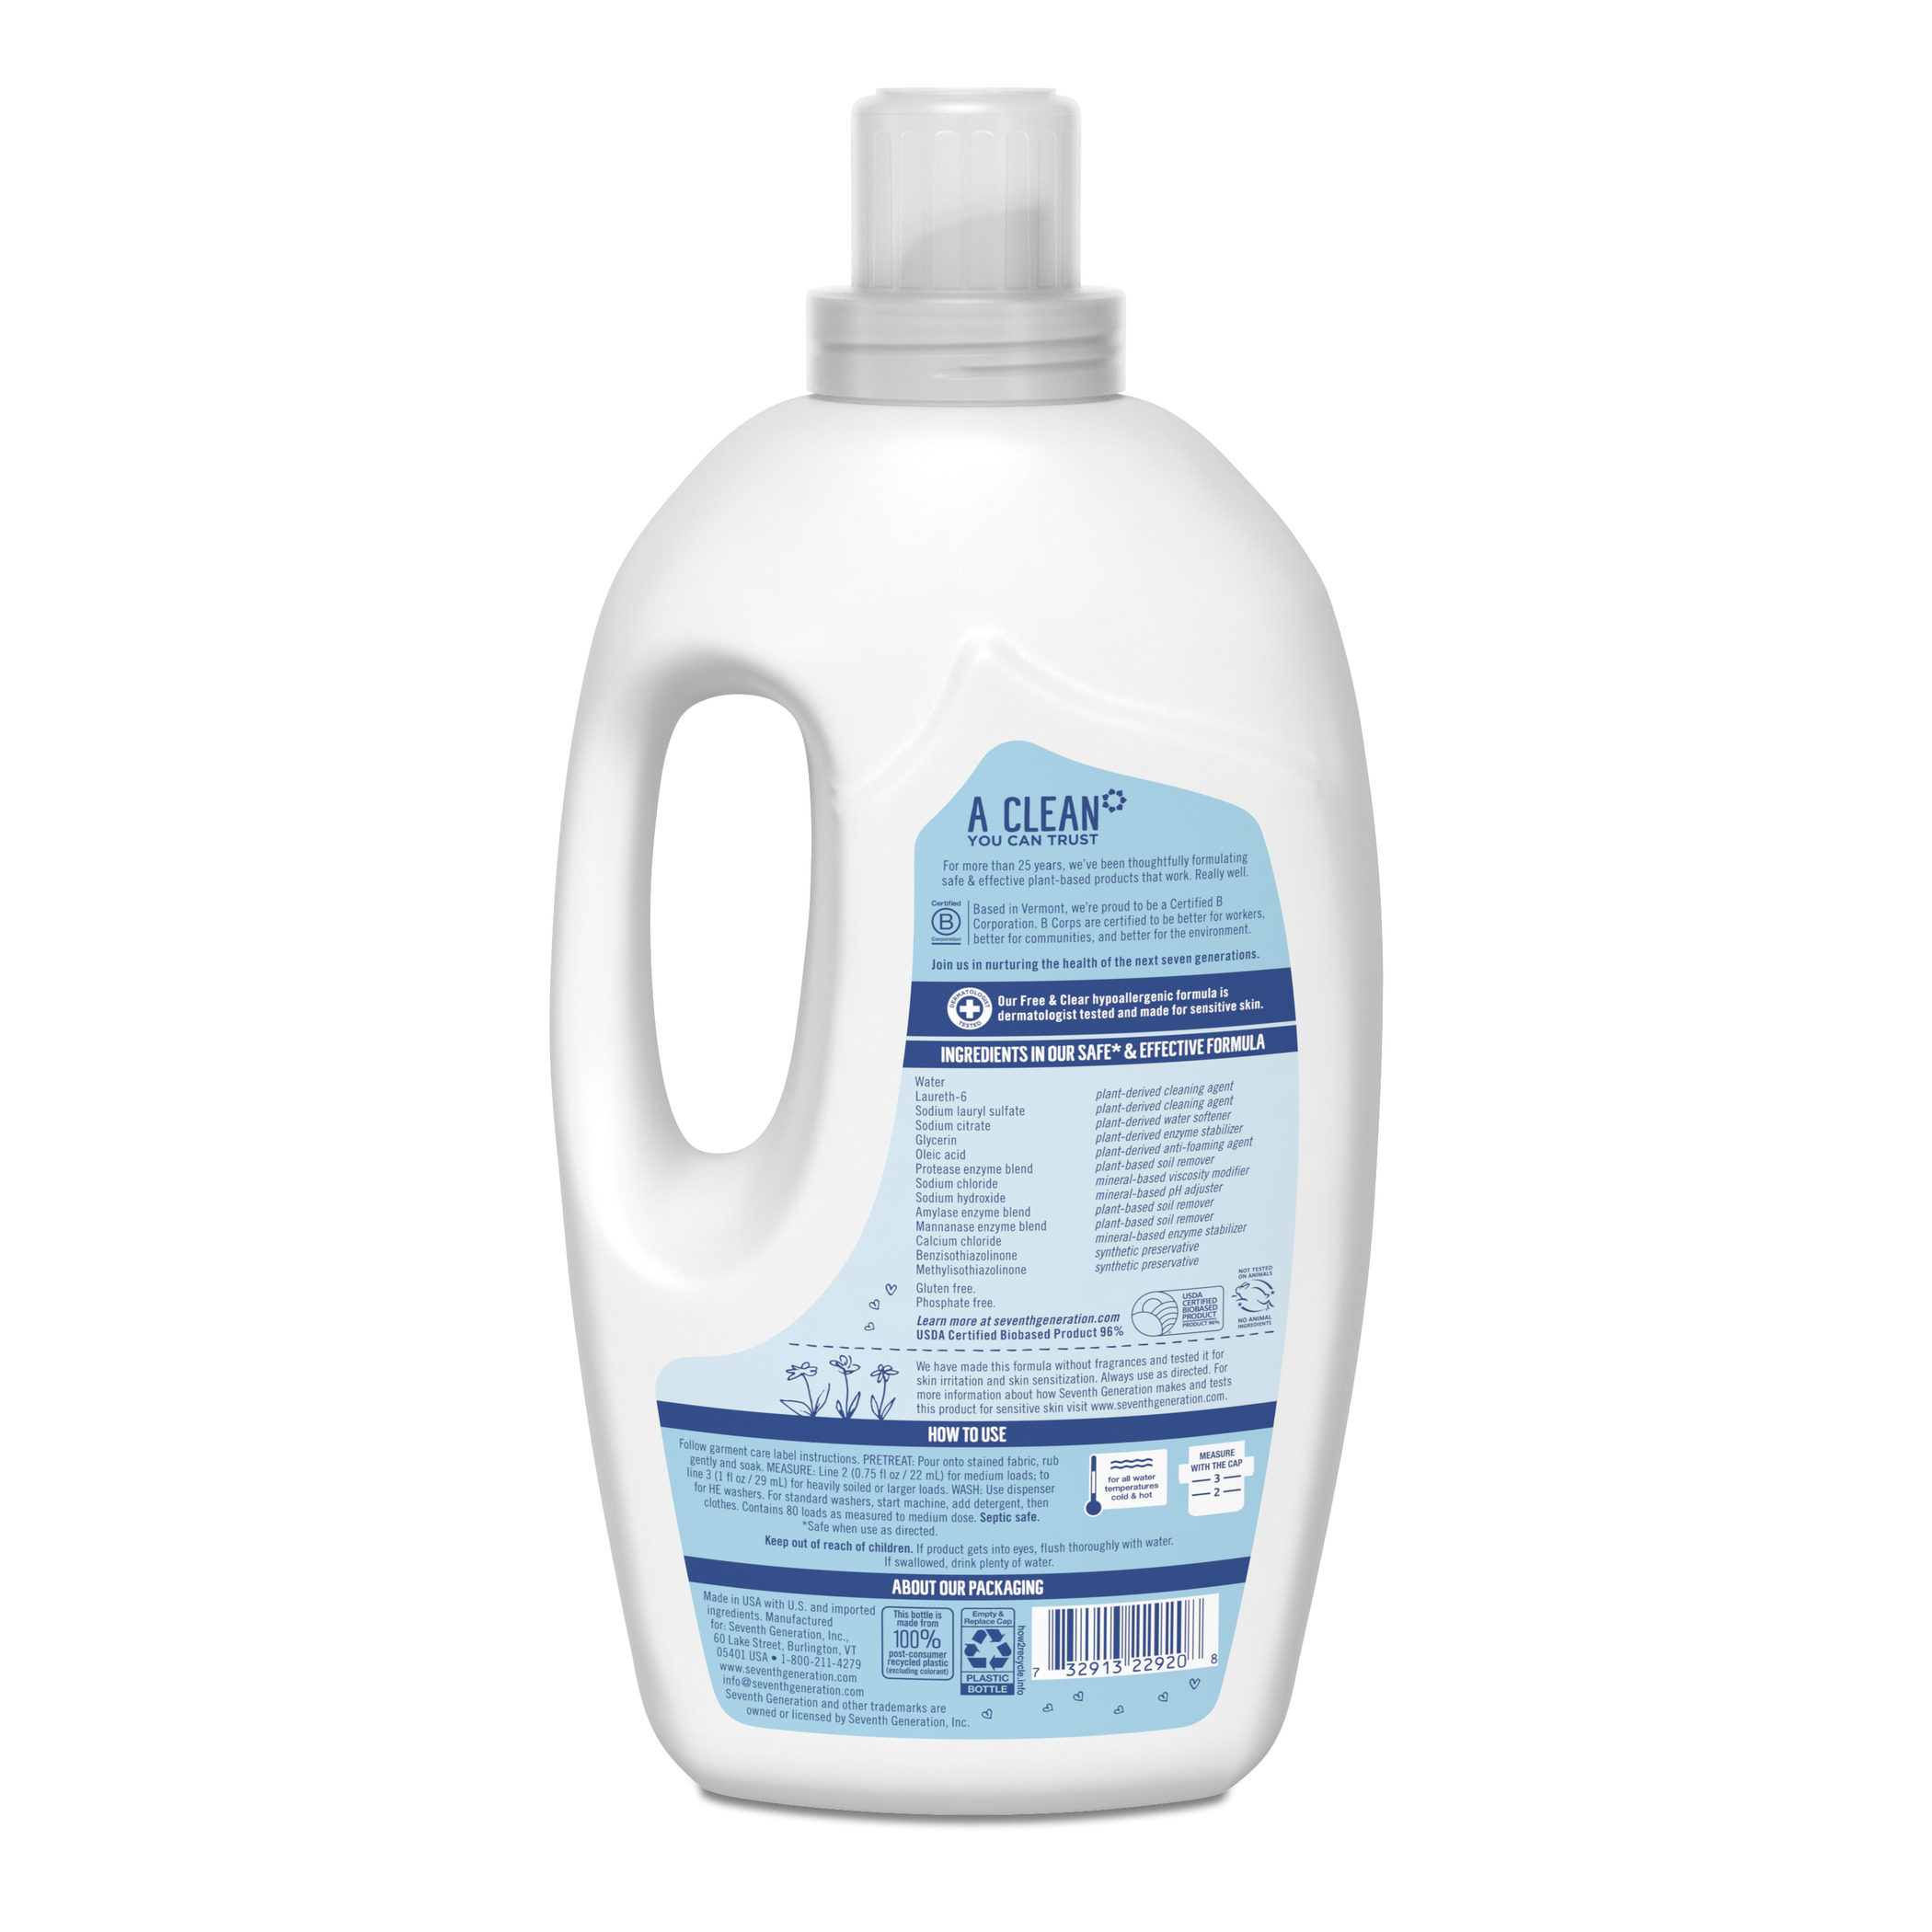 Laundry Detergent - Free \u0026 Clear - Made 